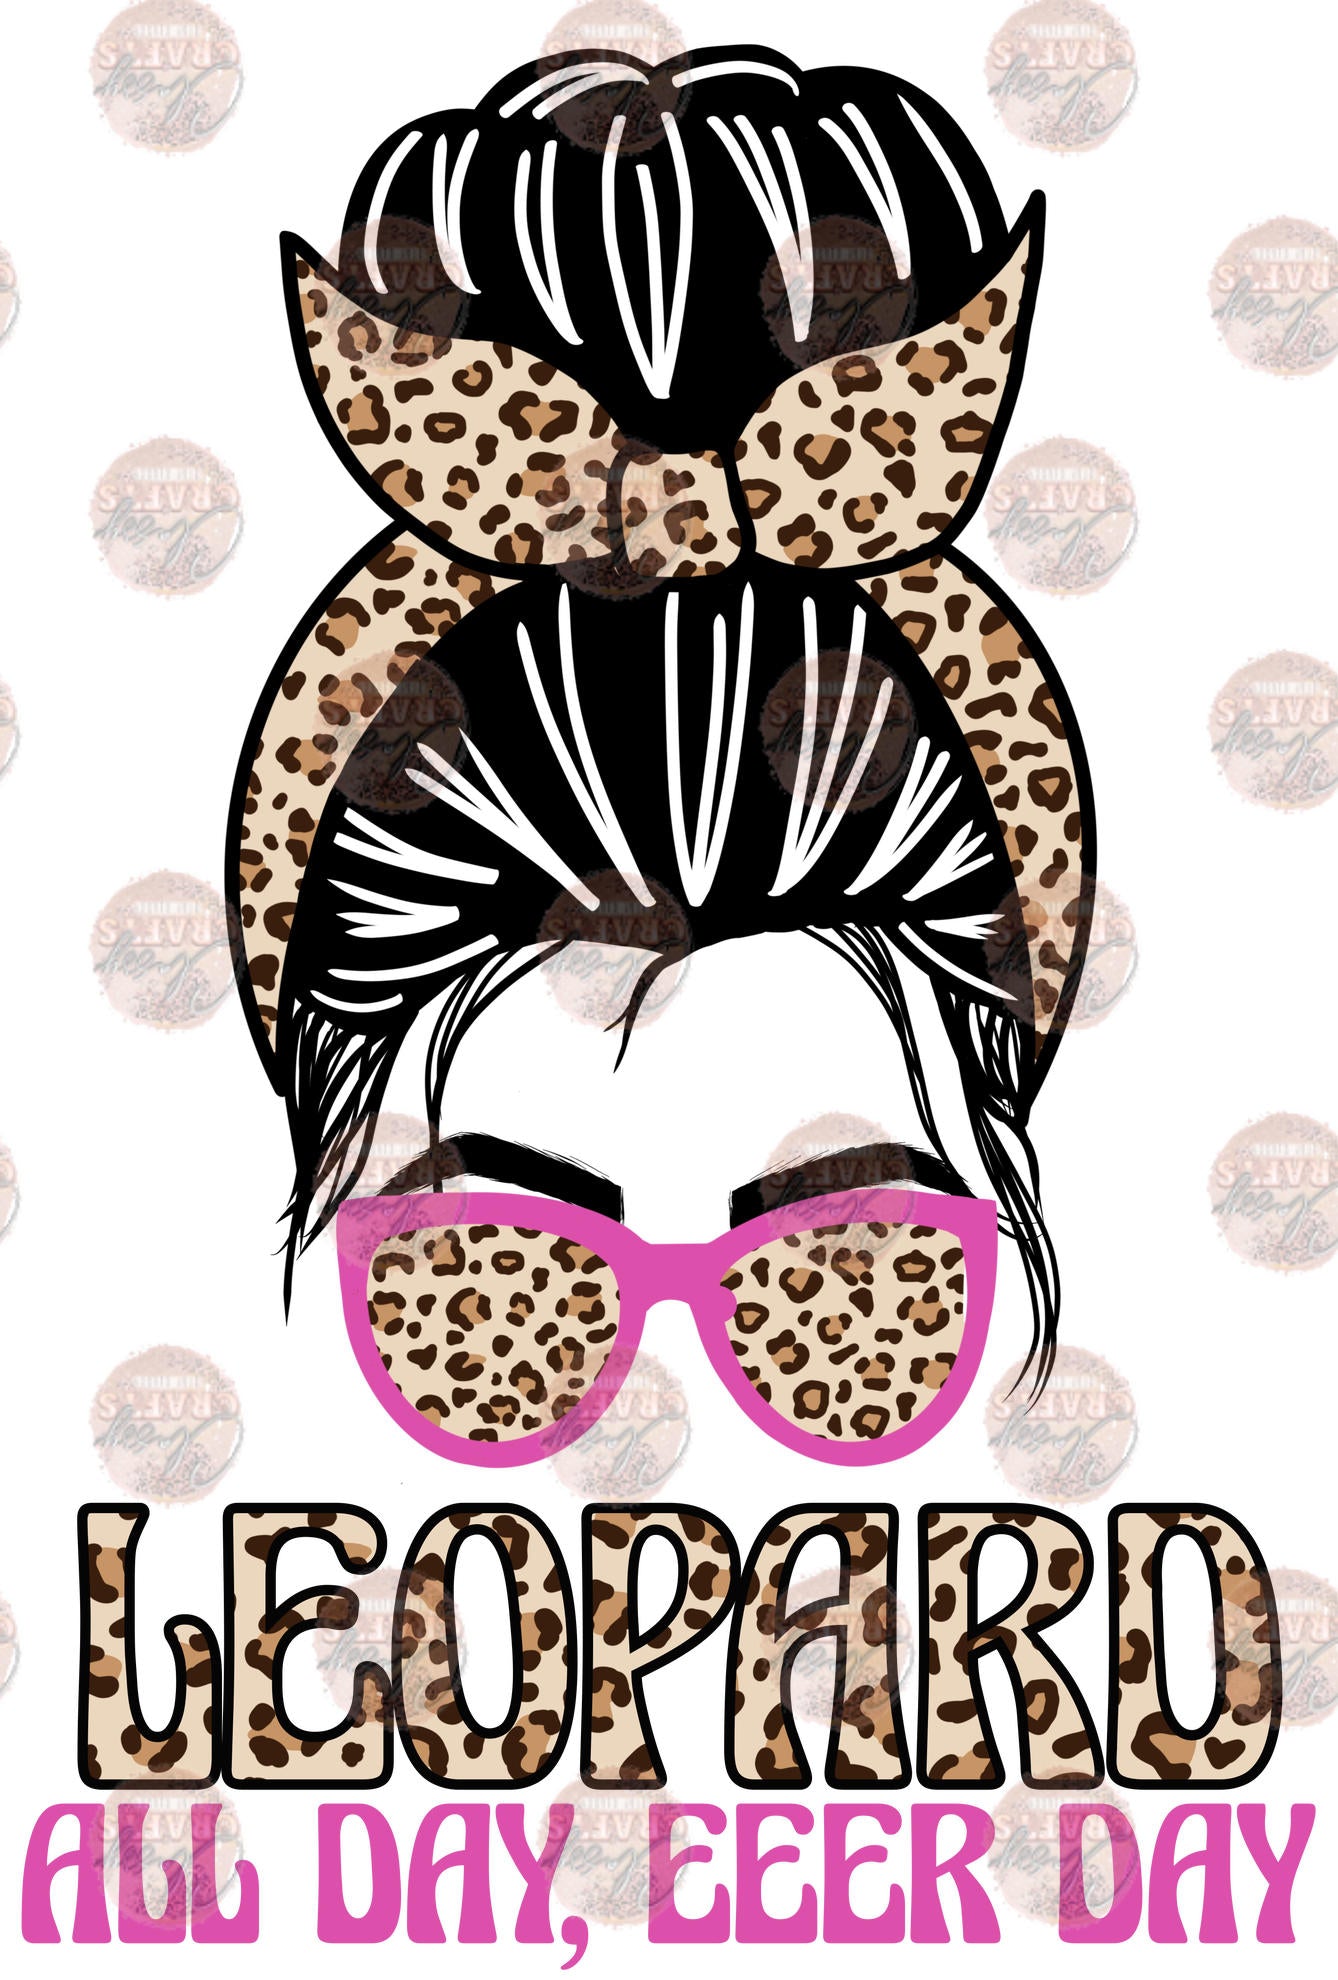 Leopard All Day, Eeer Day Transfer